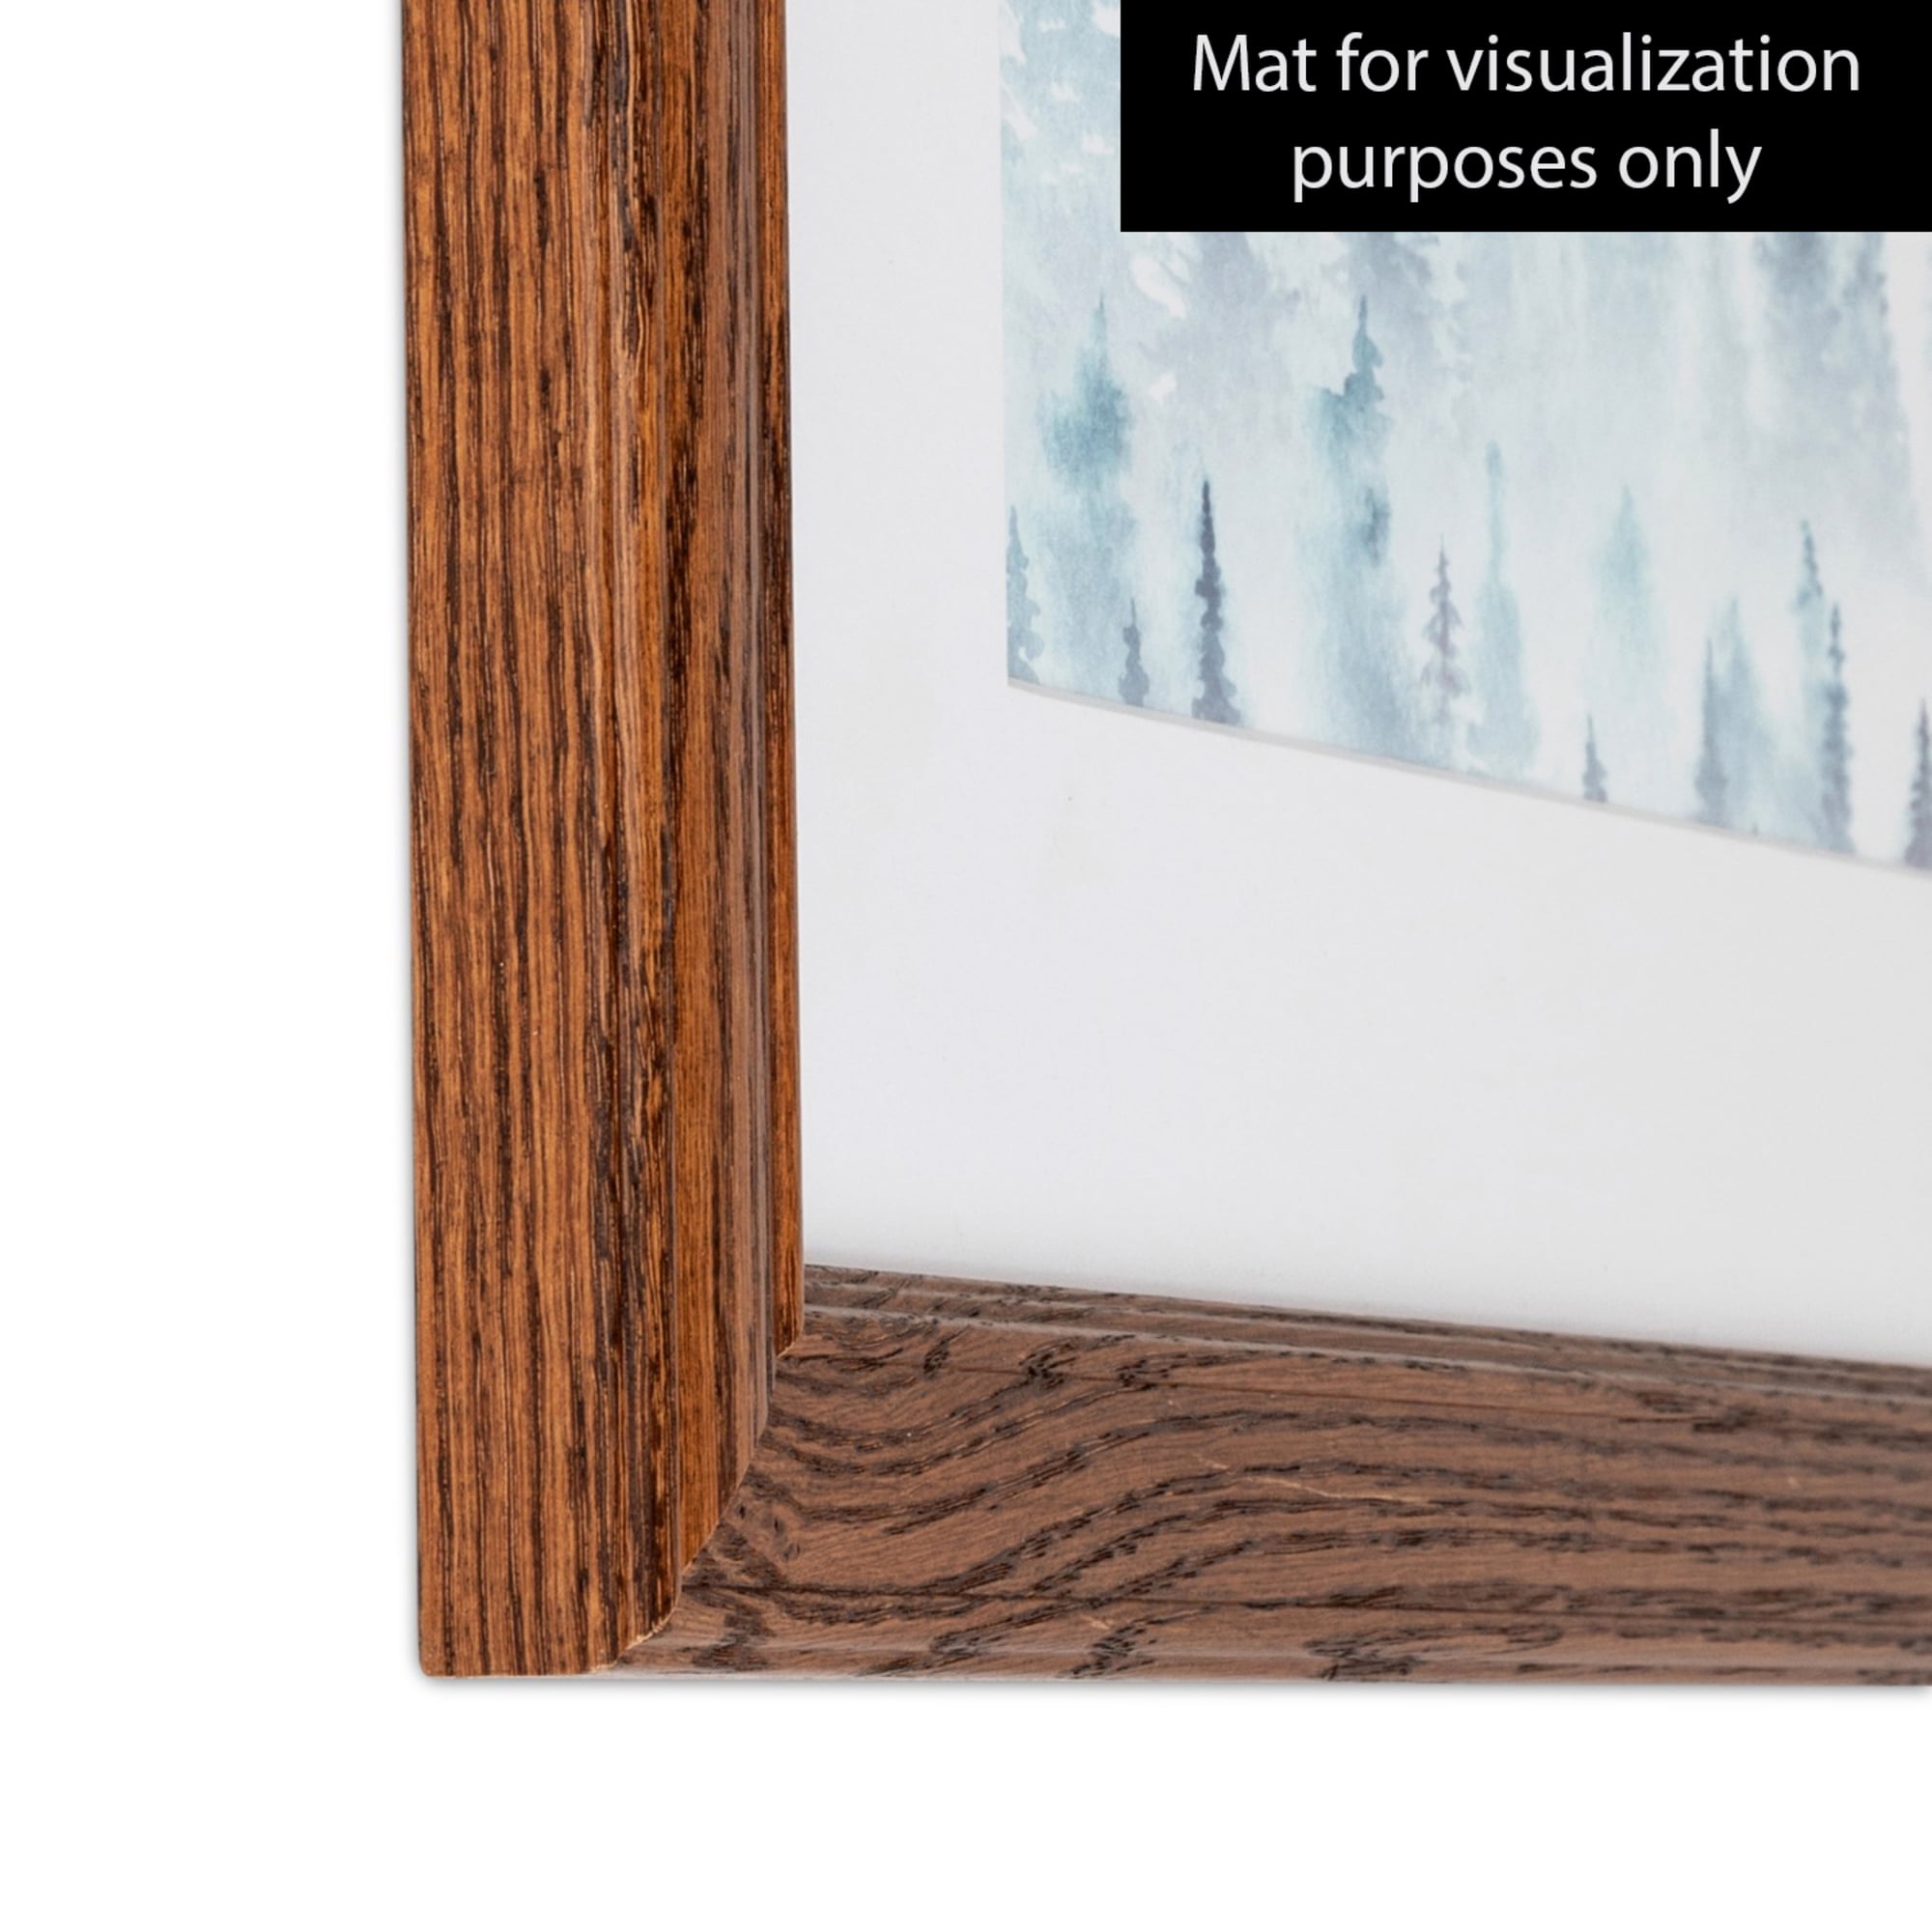 12x16 Frame Wood Tones Solid Wood Canvas Frame Width 1.125 Inches - Interior Frame Depth 1 9/16 Inches|Red